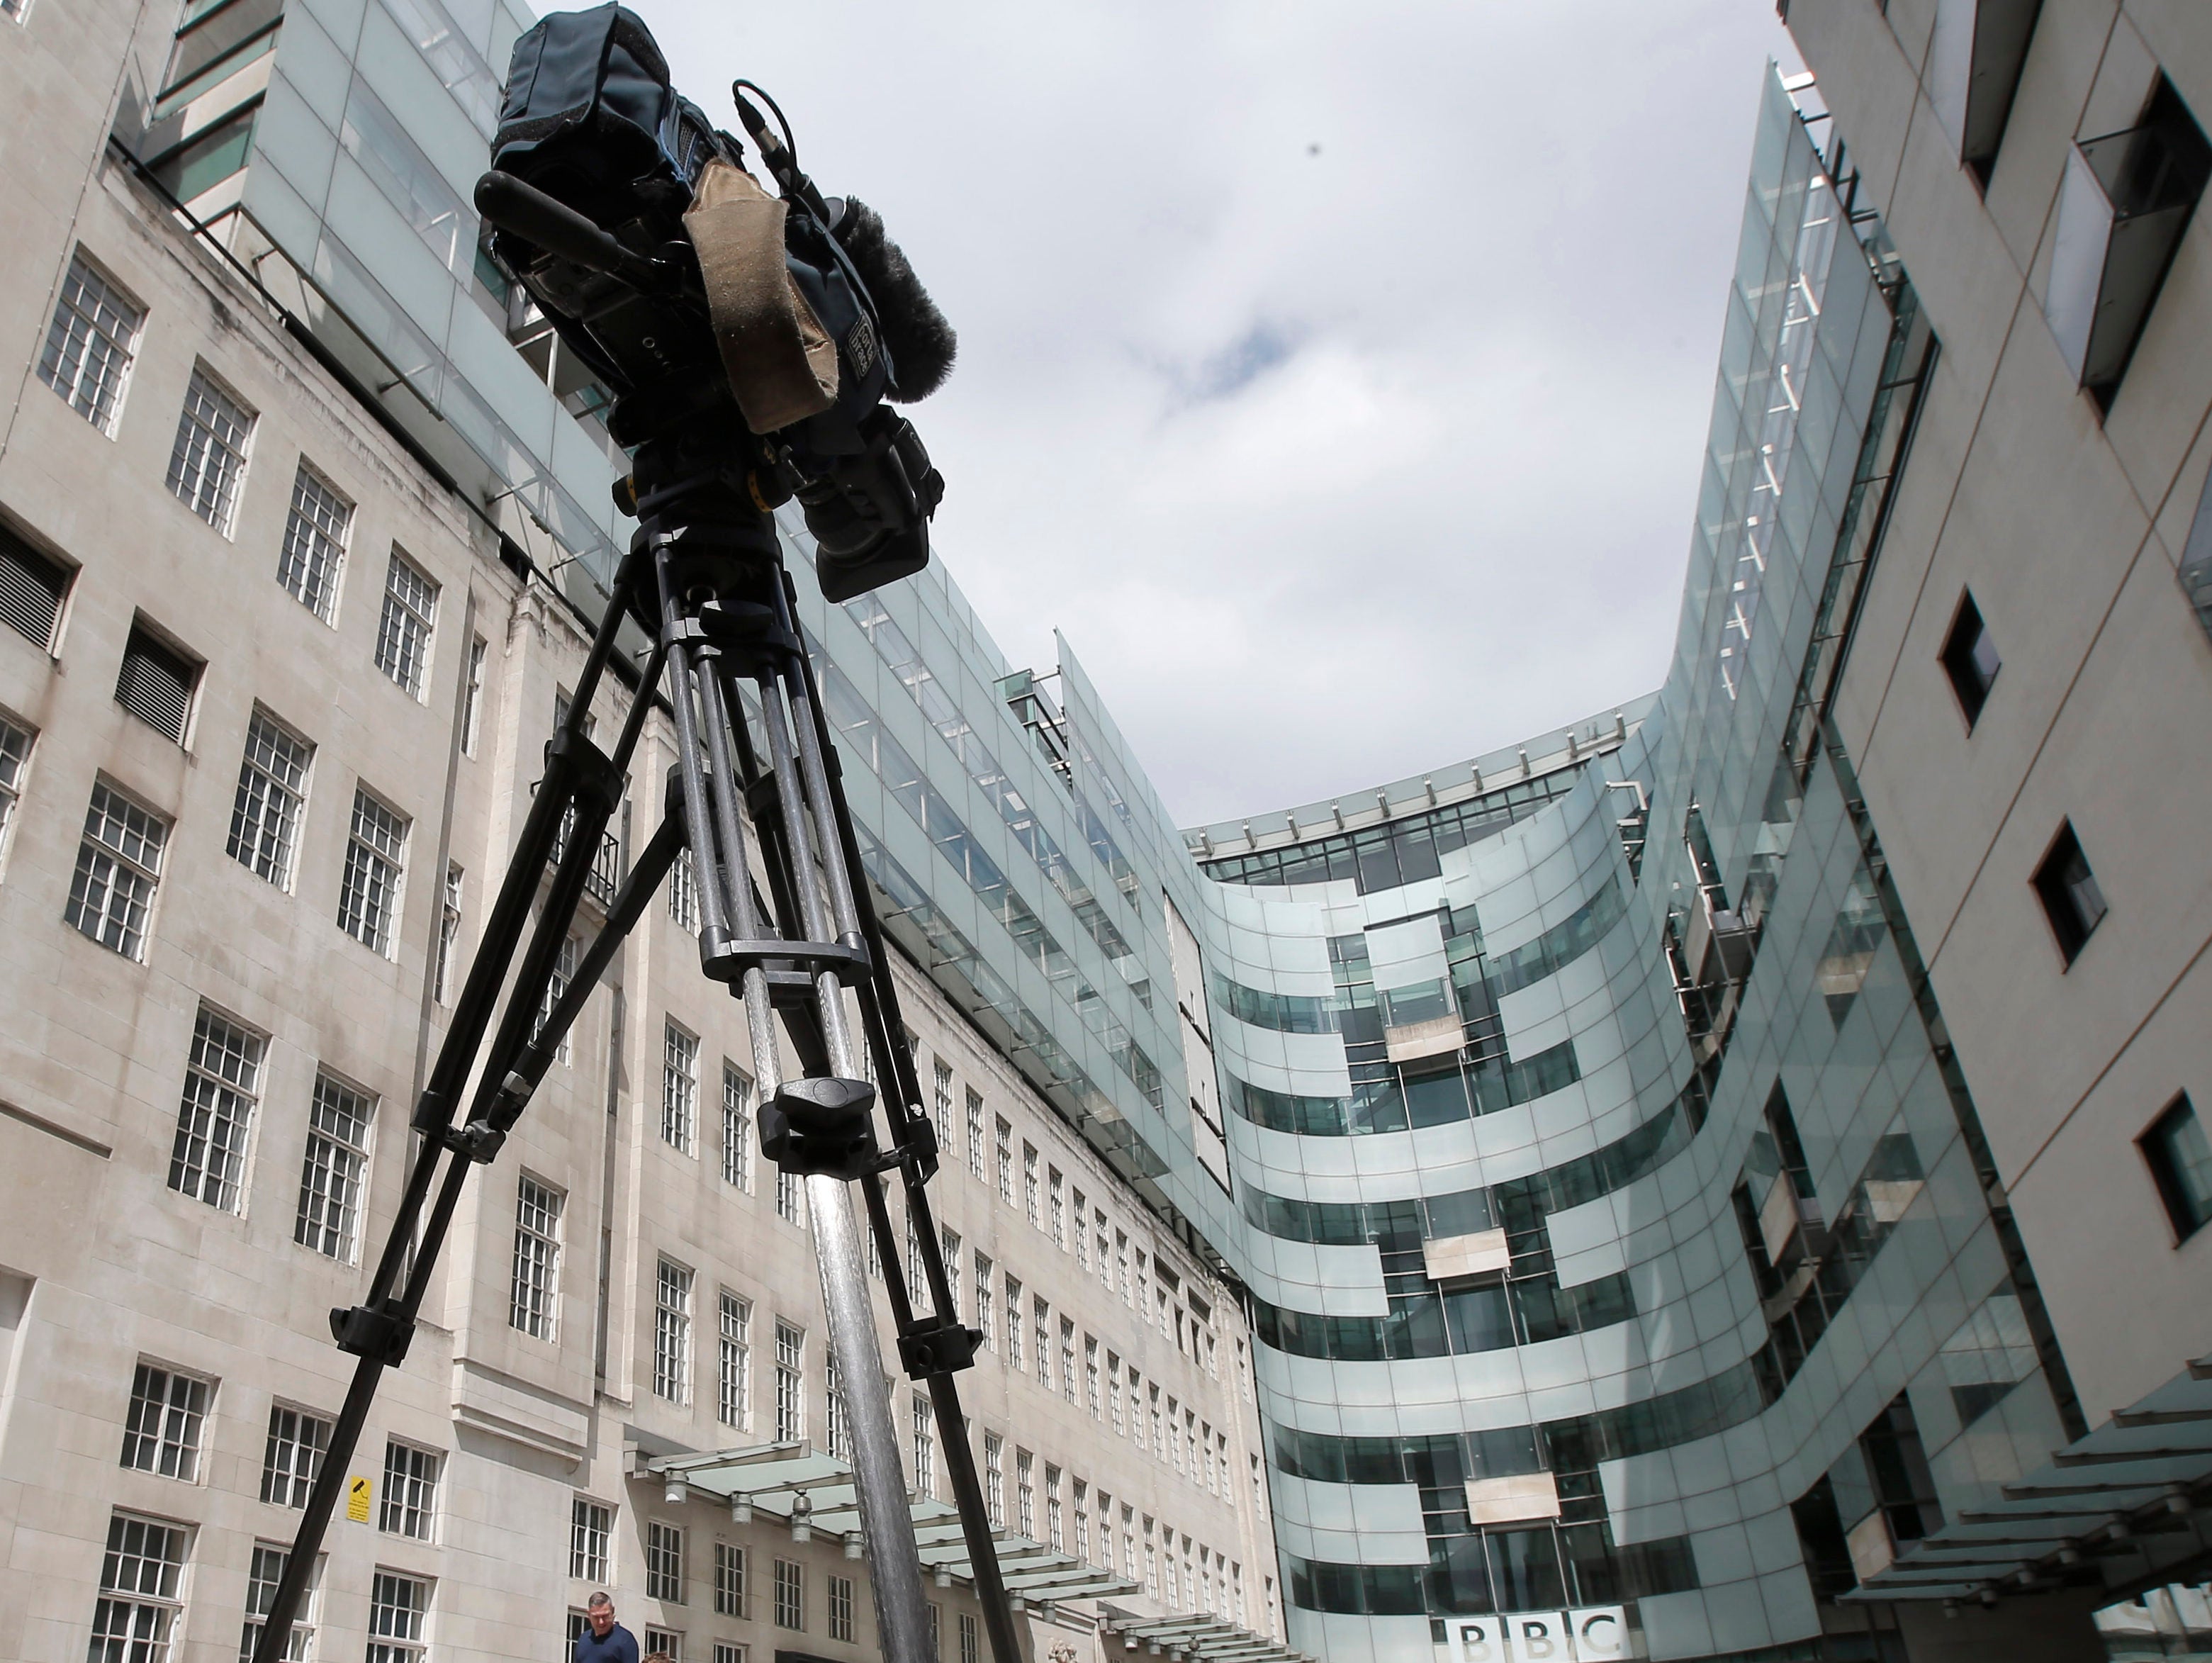 Judge rejects appeal for judicial review into alleged BBC 'Brexit bias'